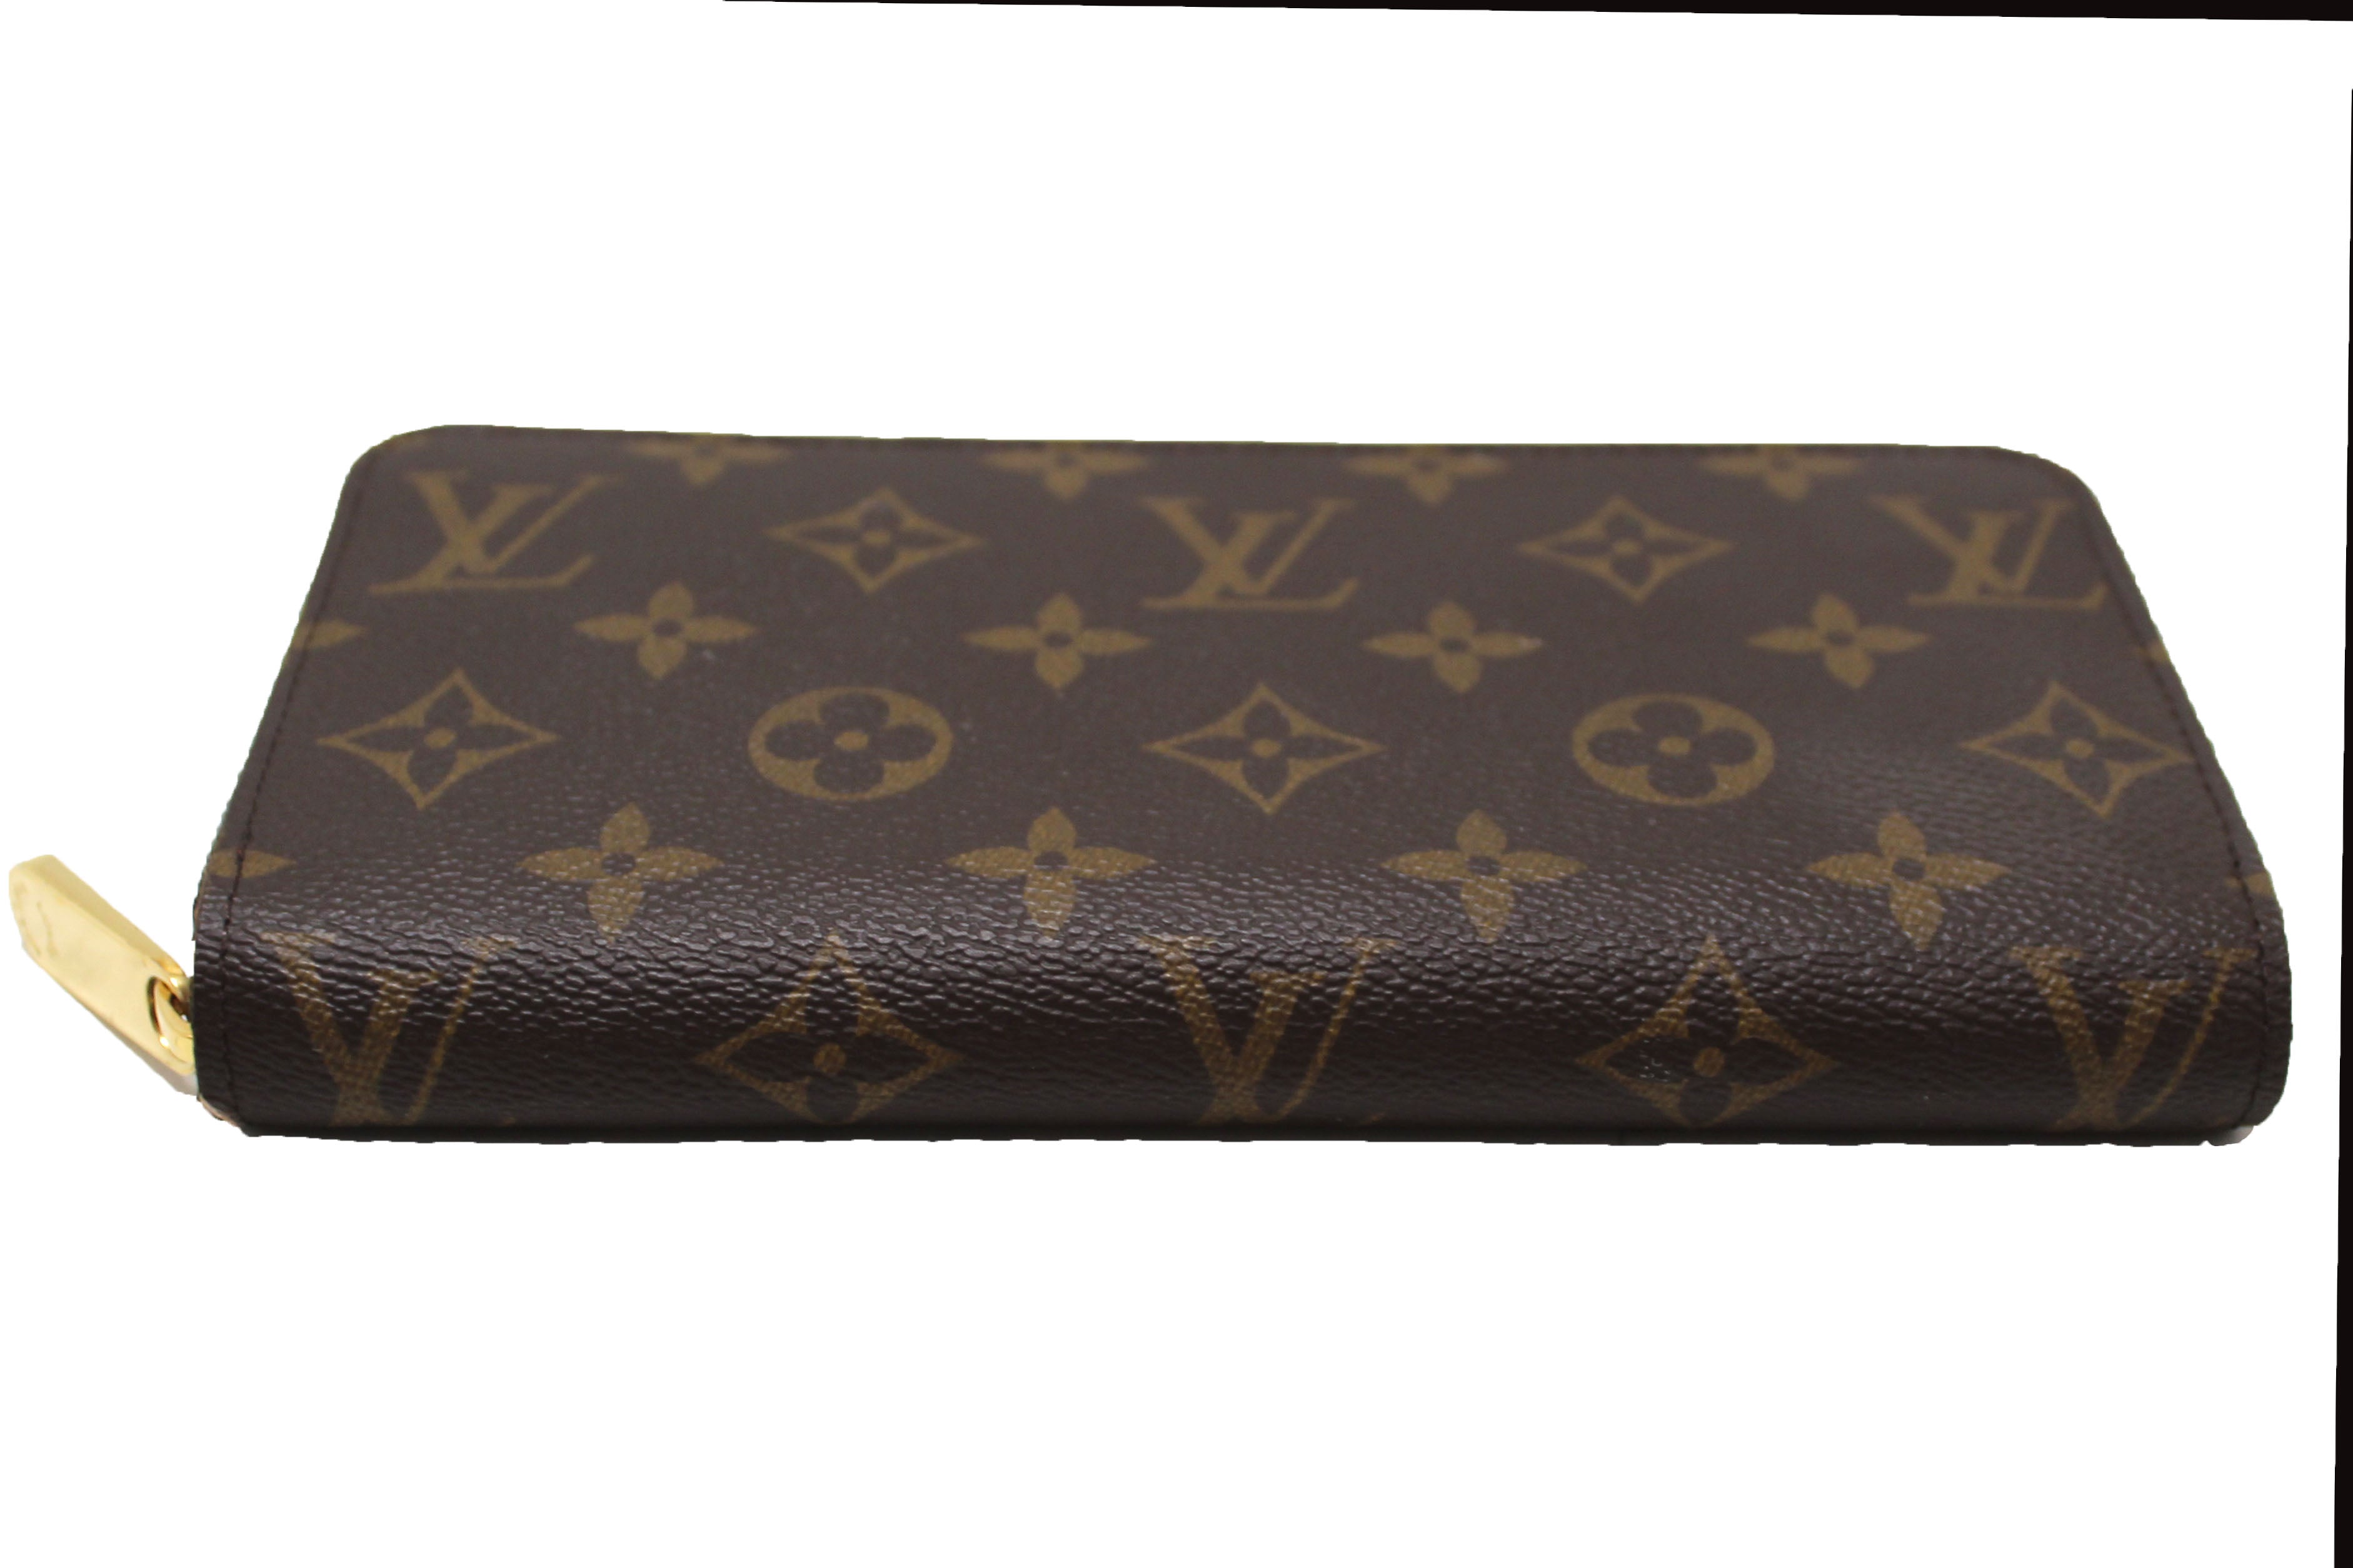 Authentic Louis Vuitton Classic Monogram Canvas Zippy with Red Interior Wallet